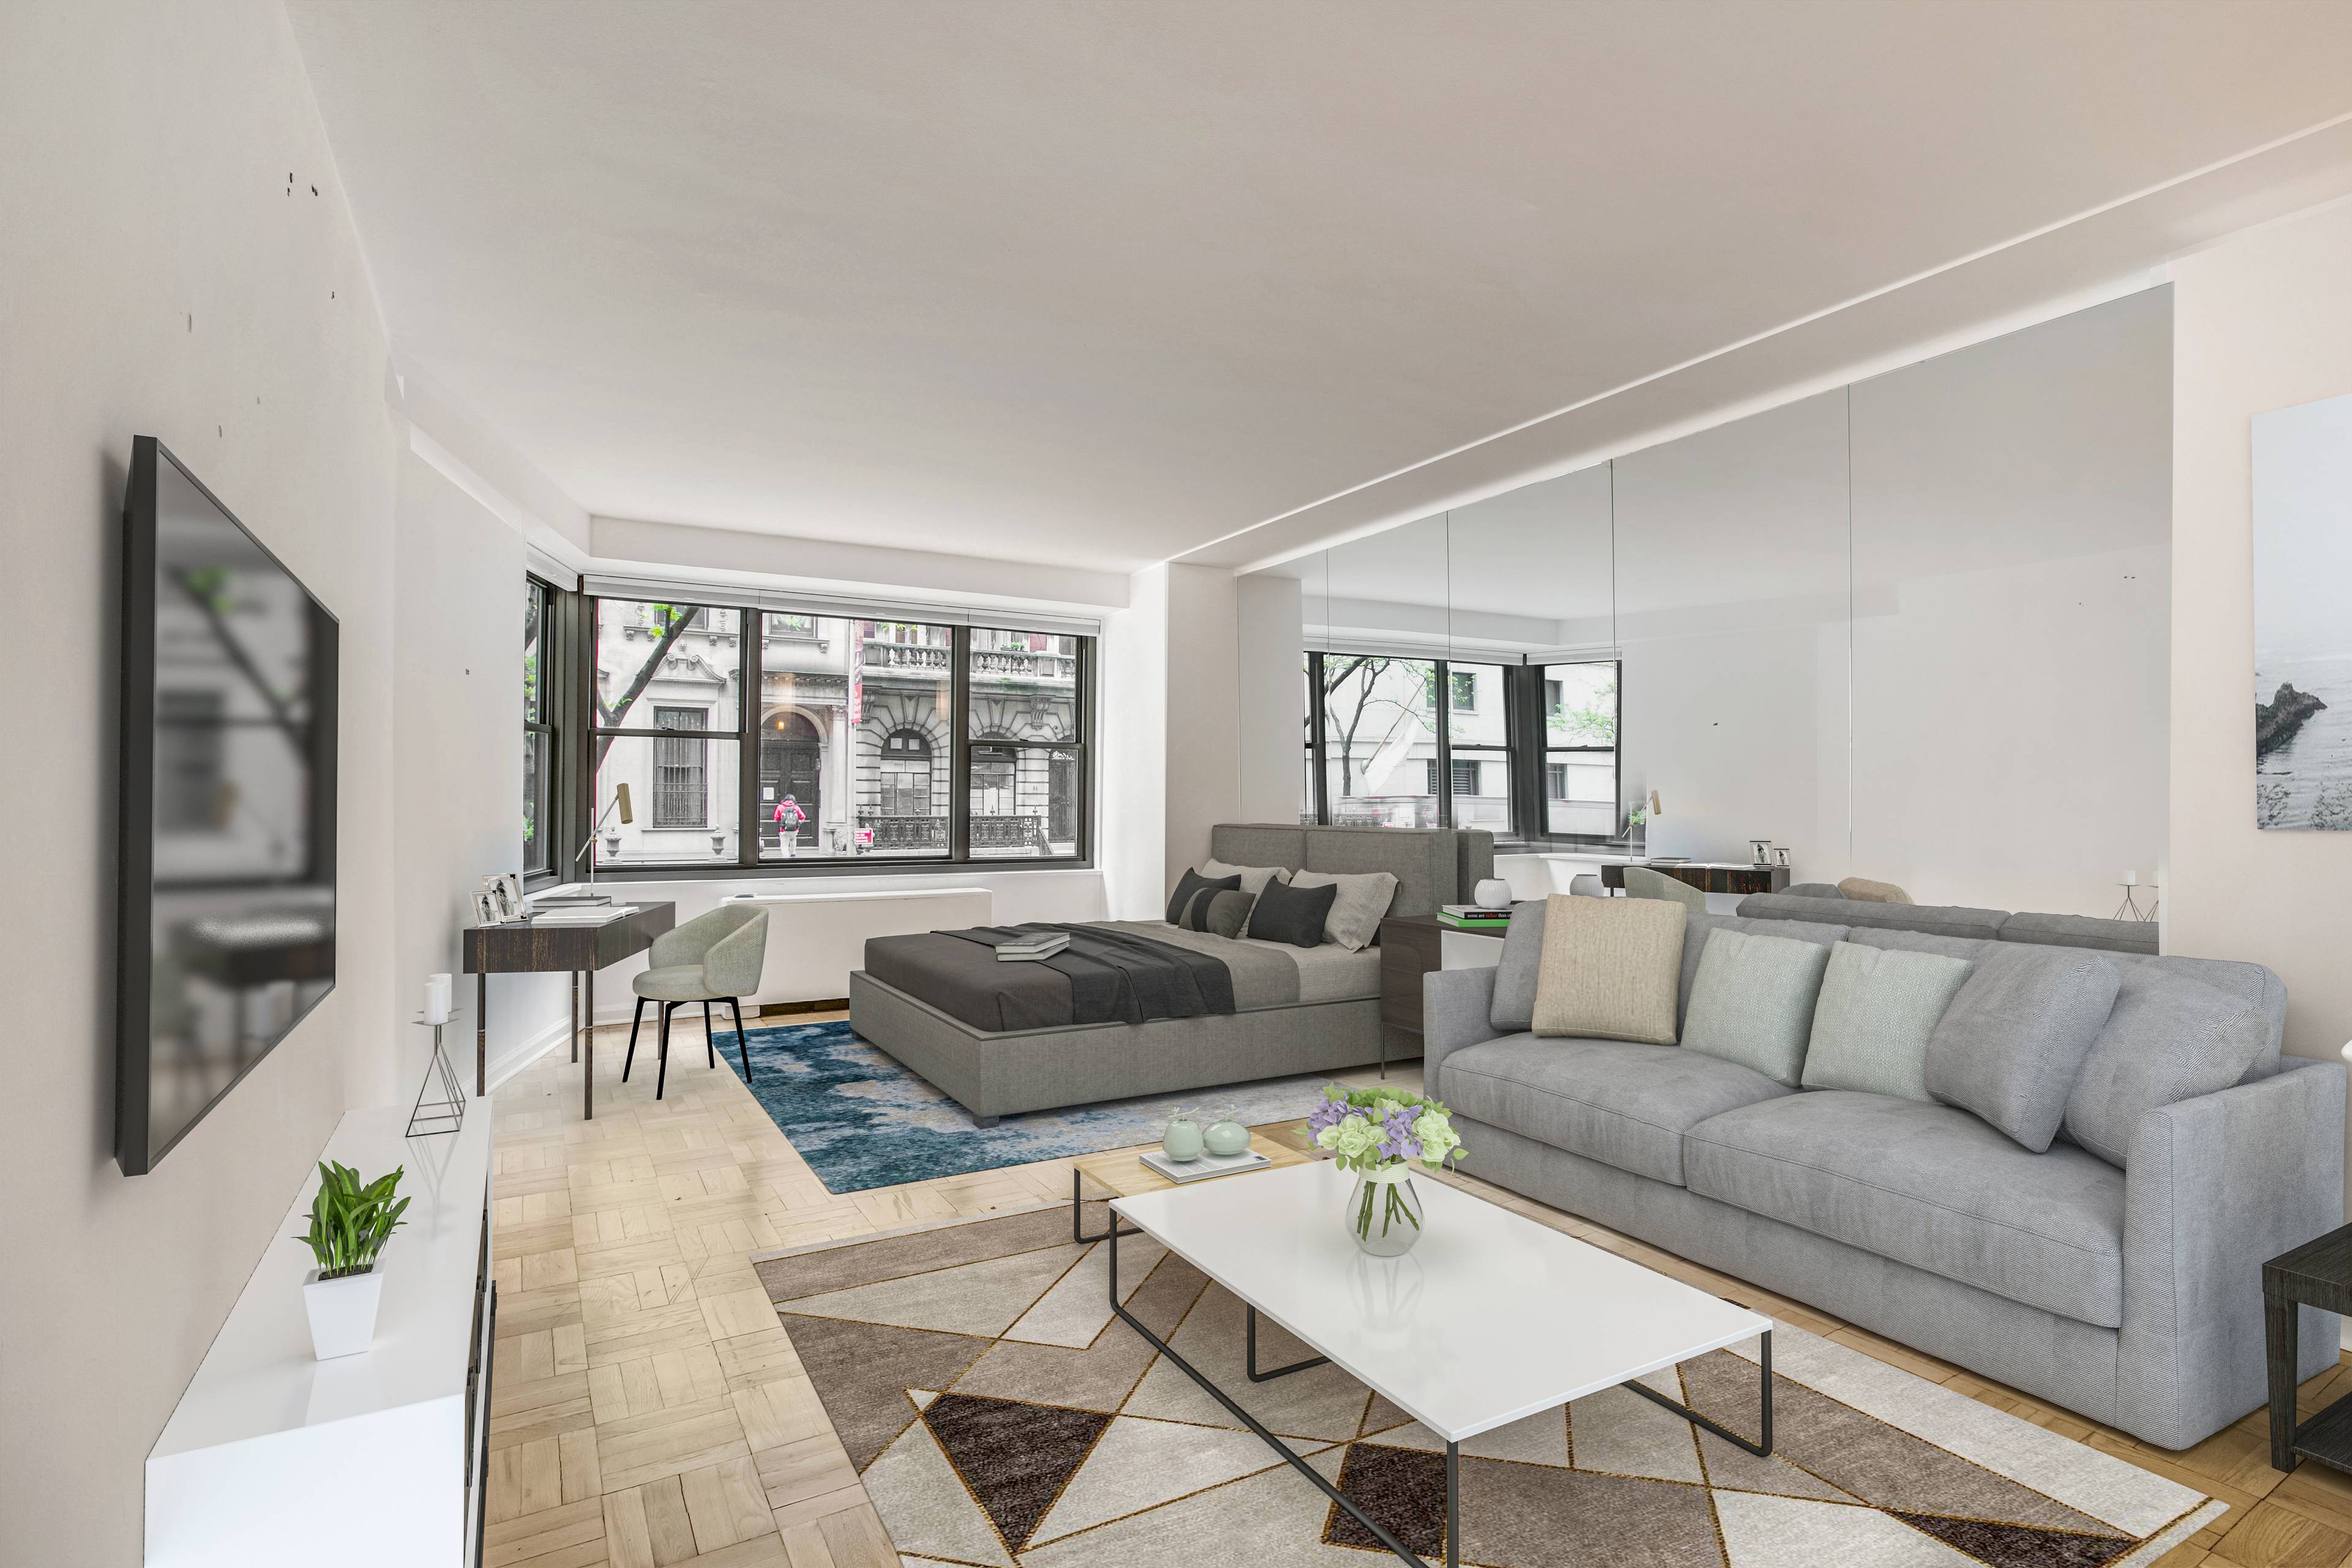 Welcome to the Elysabeth, a full service condominium located in the heart of Murray Hill between Park Avenue and Madison Avenue.